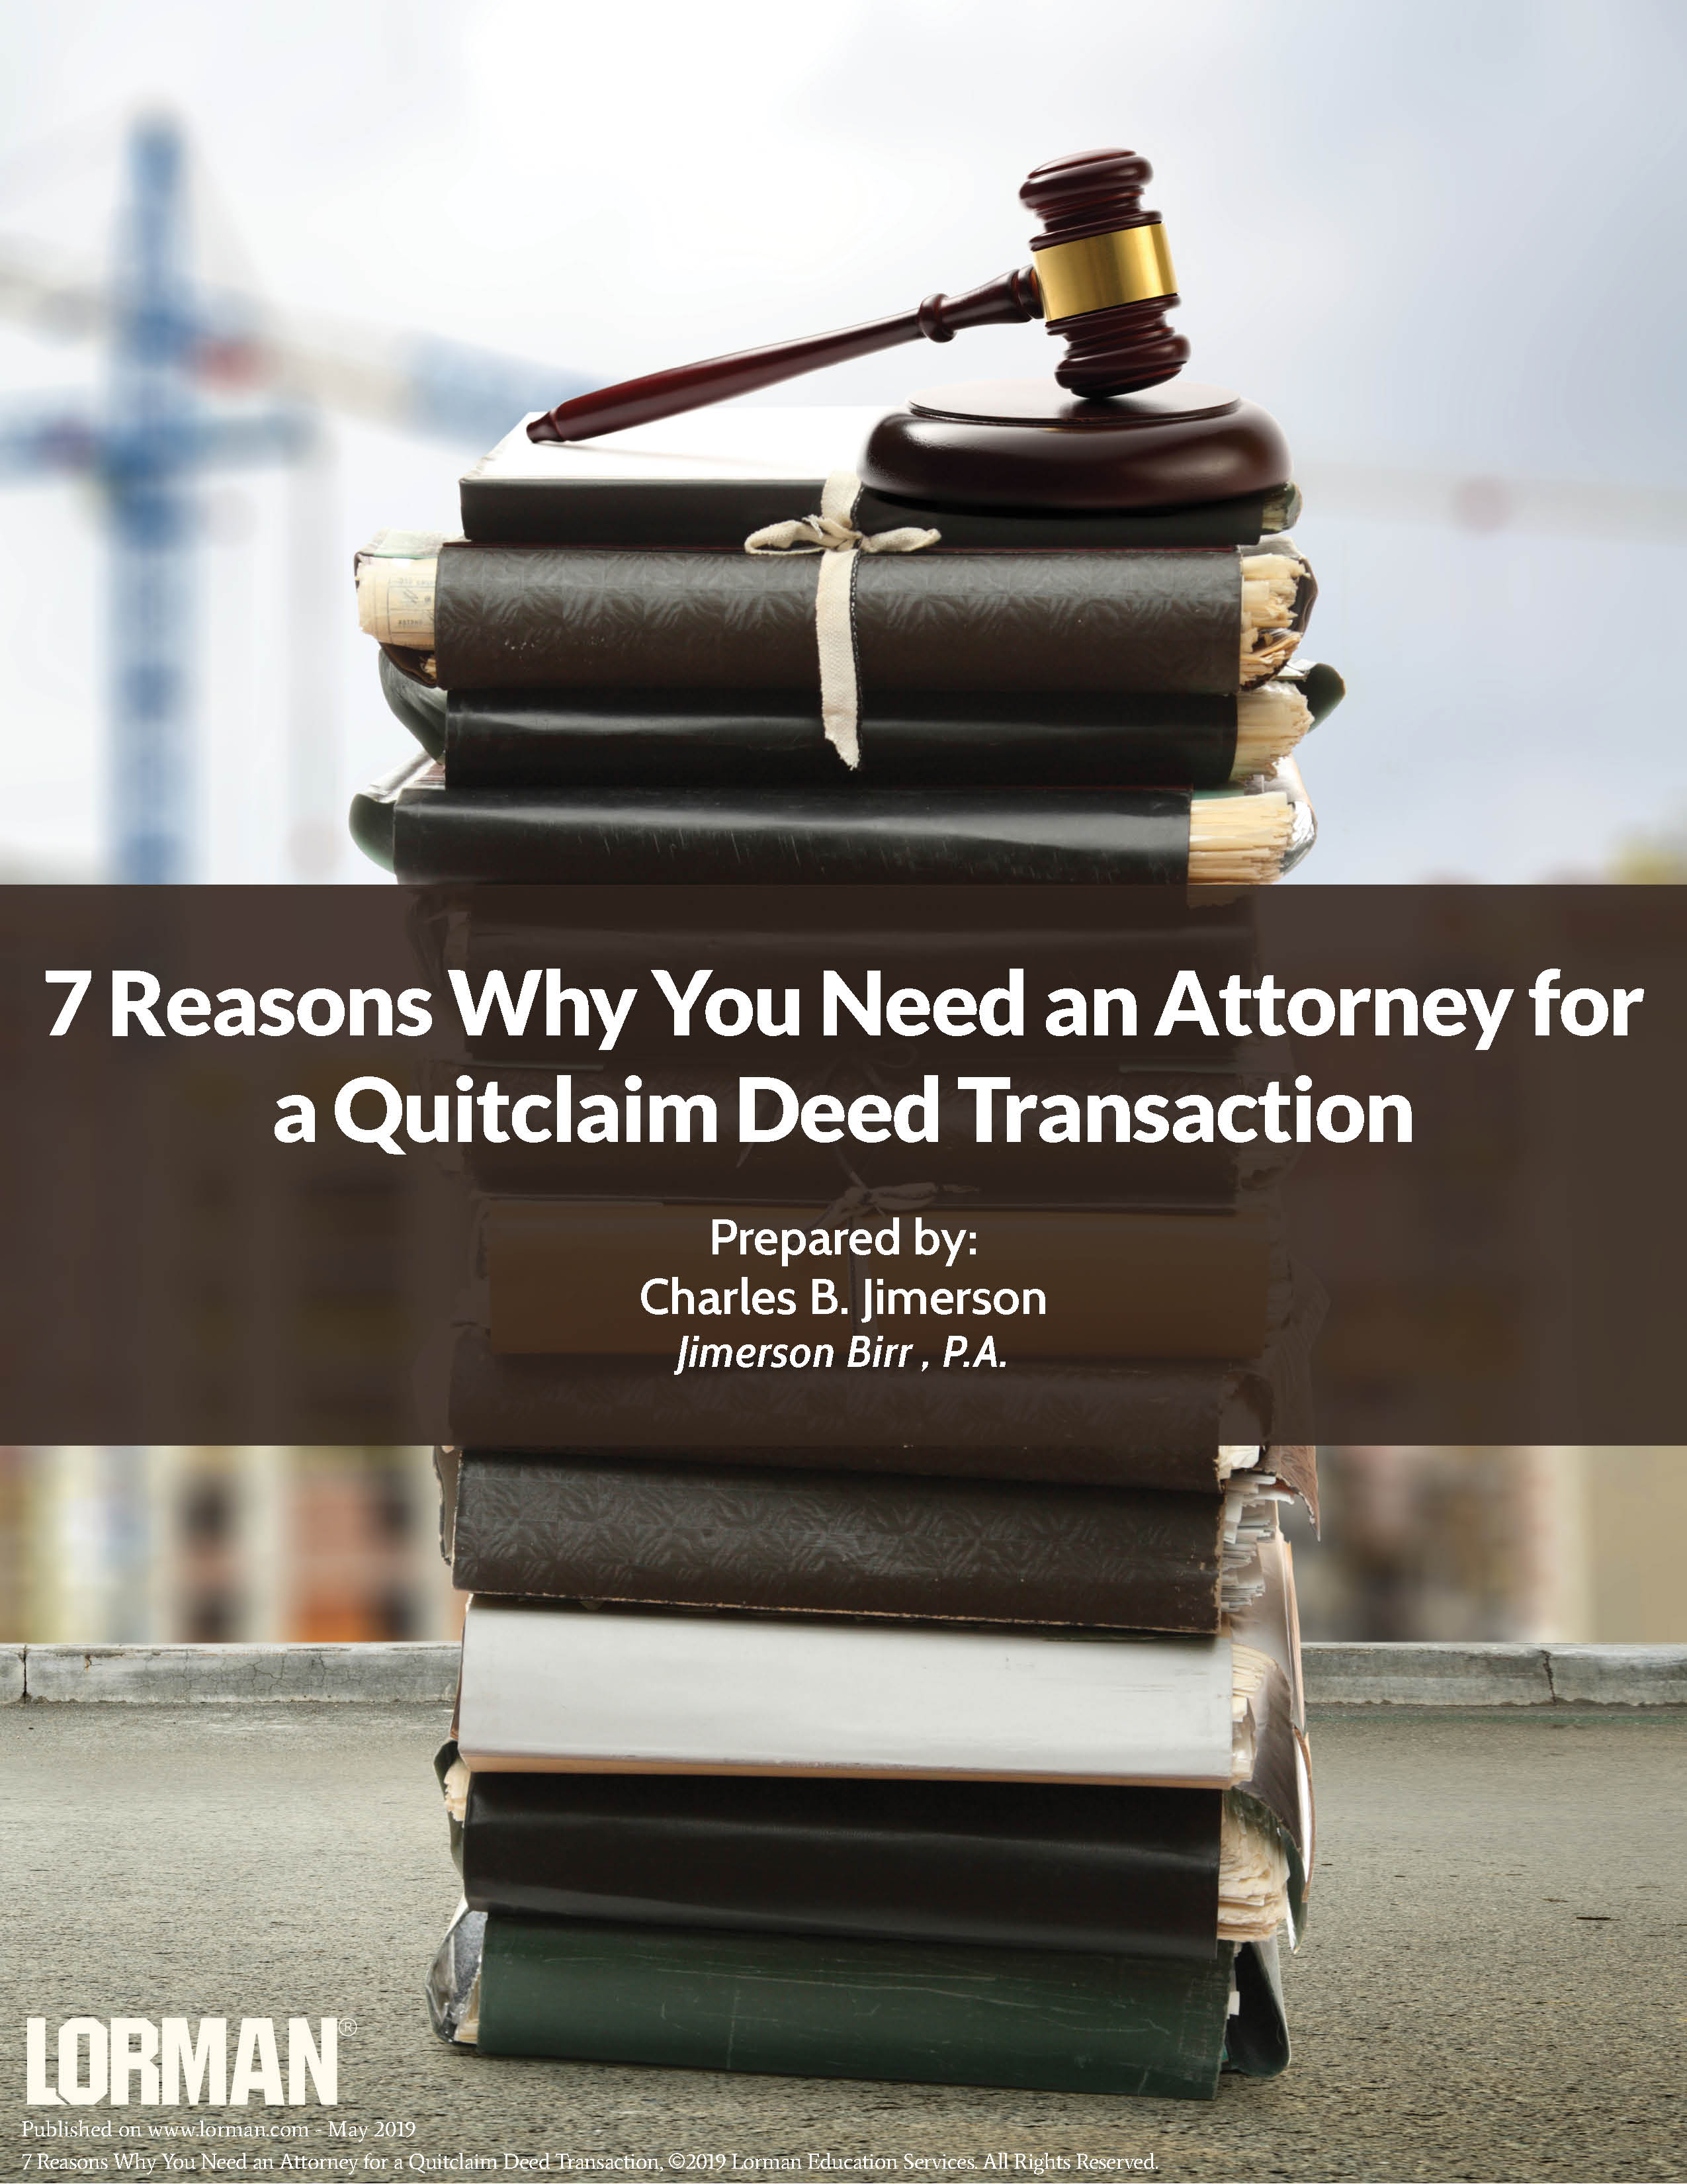 7 Reasons Why You Need an Attorney for a Quitclaim Deed Transaction